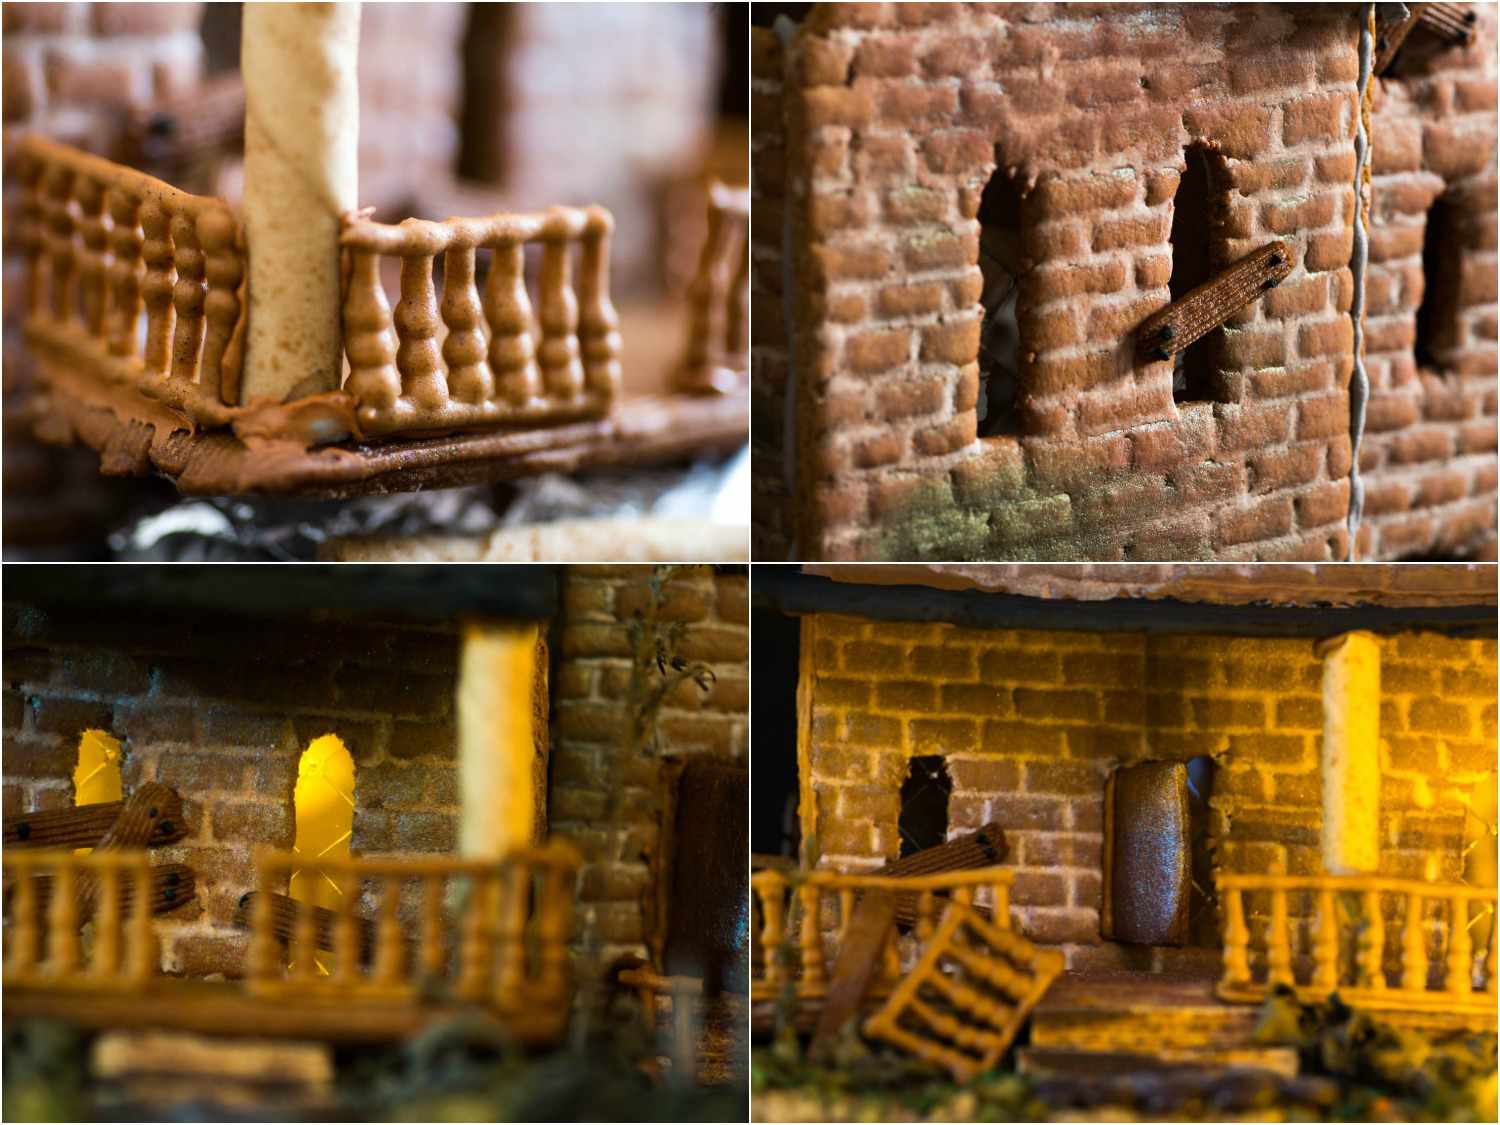 Collage of photos of dilapidated details of gingerbread house: piped gingerbread-paste railings along the porch, boarded-up window